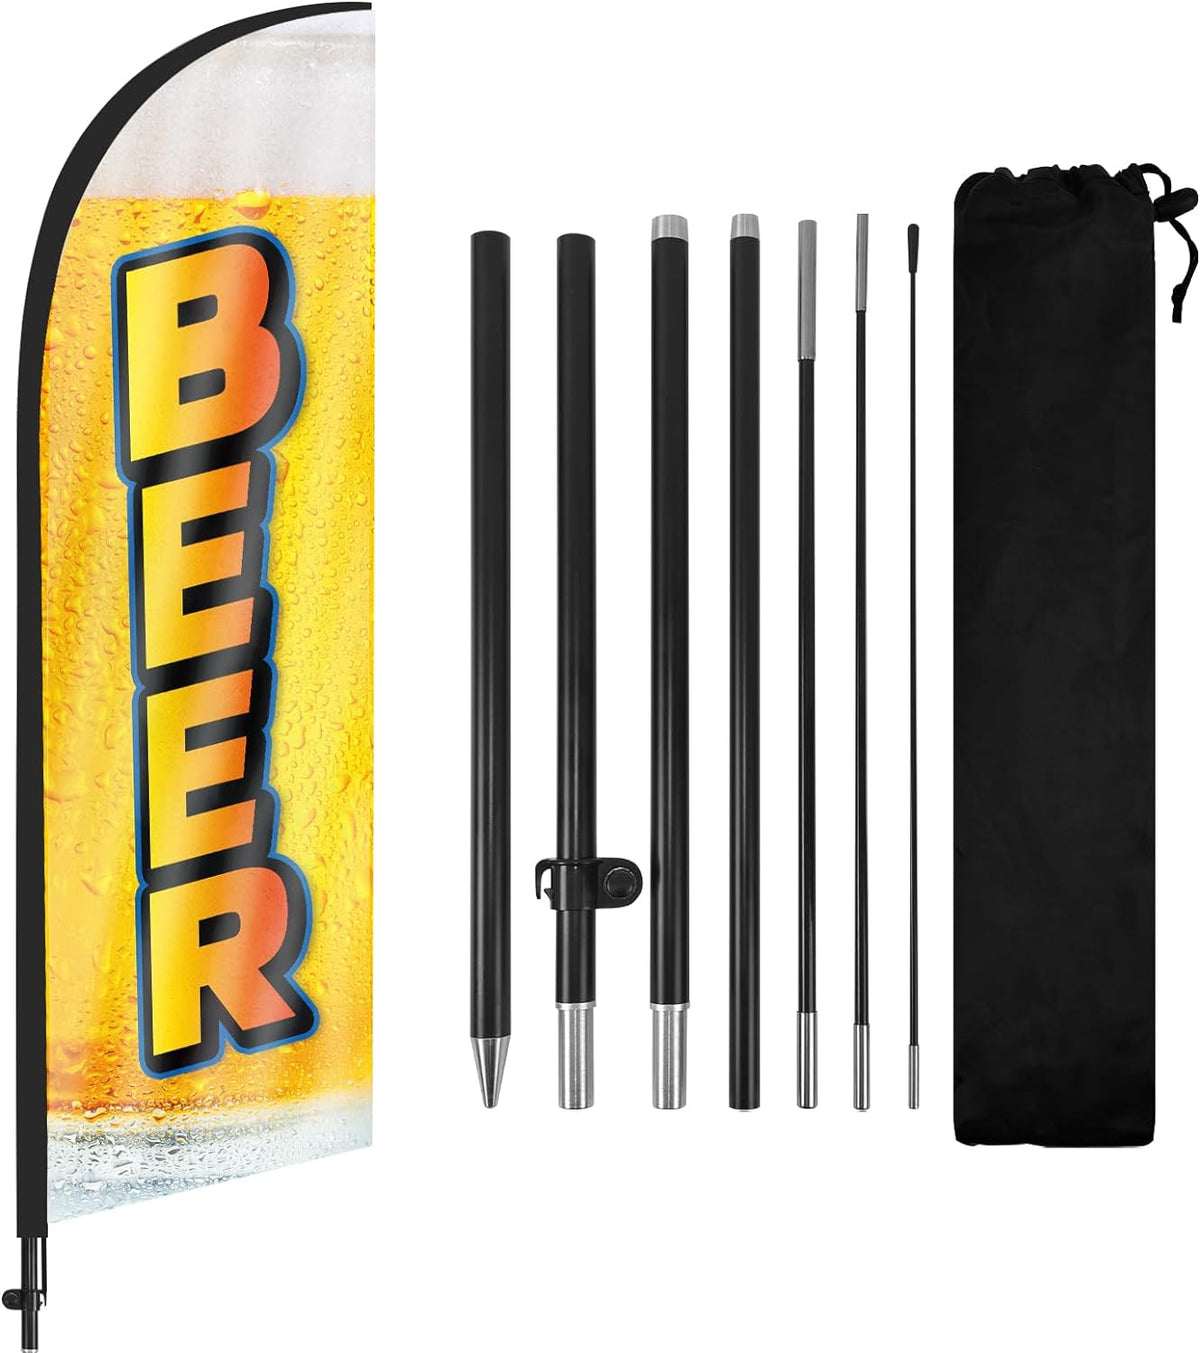 8ft Beer Feather Flag Kit - Advertising Banner with Pole and Stake